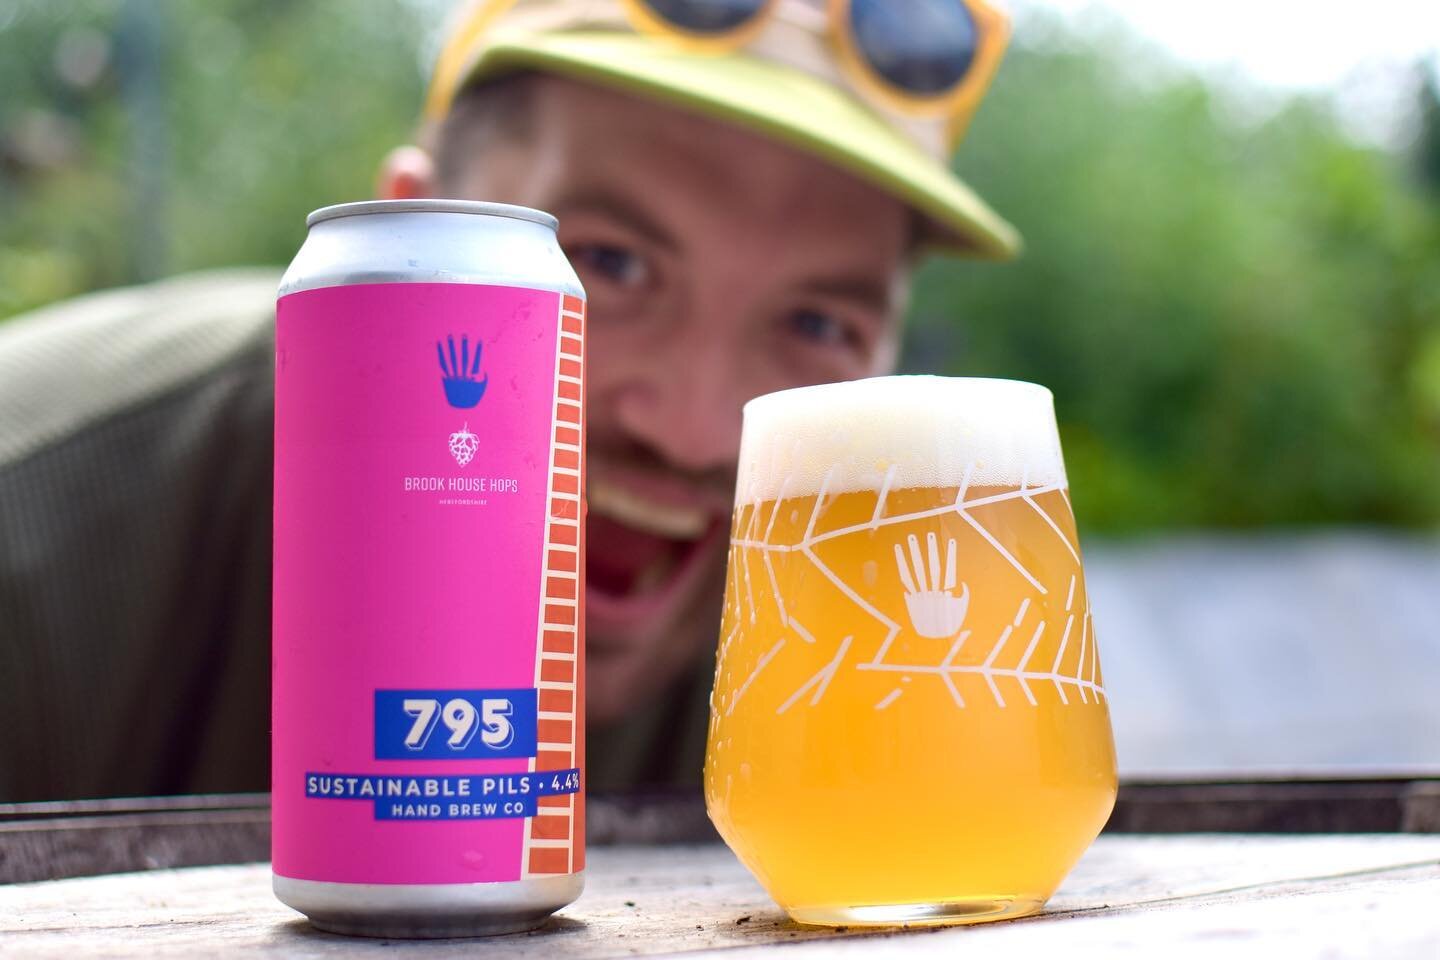 Hand Brew Co. – Sustainable Pils 795